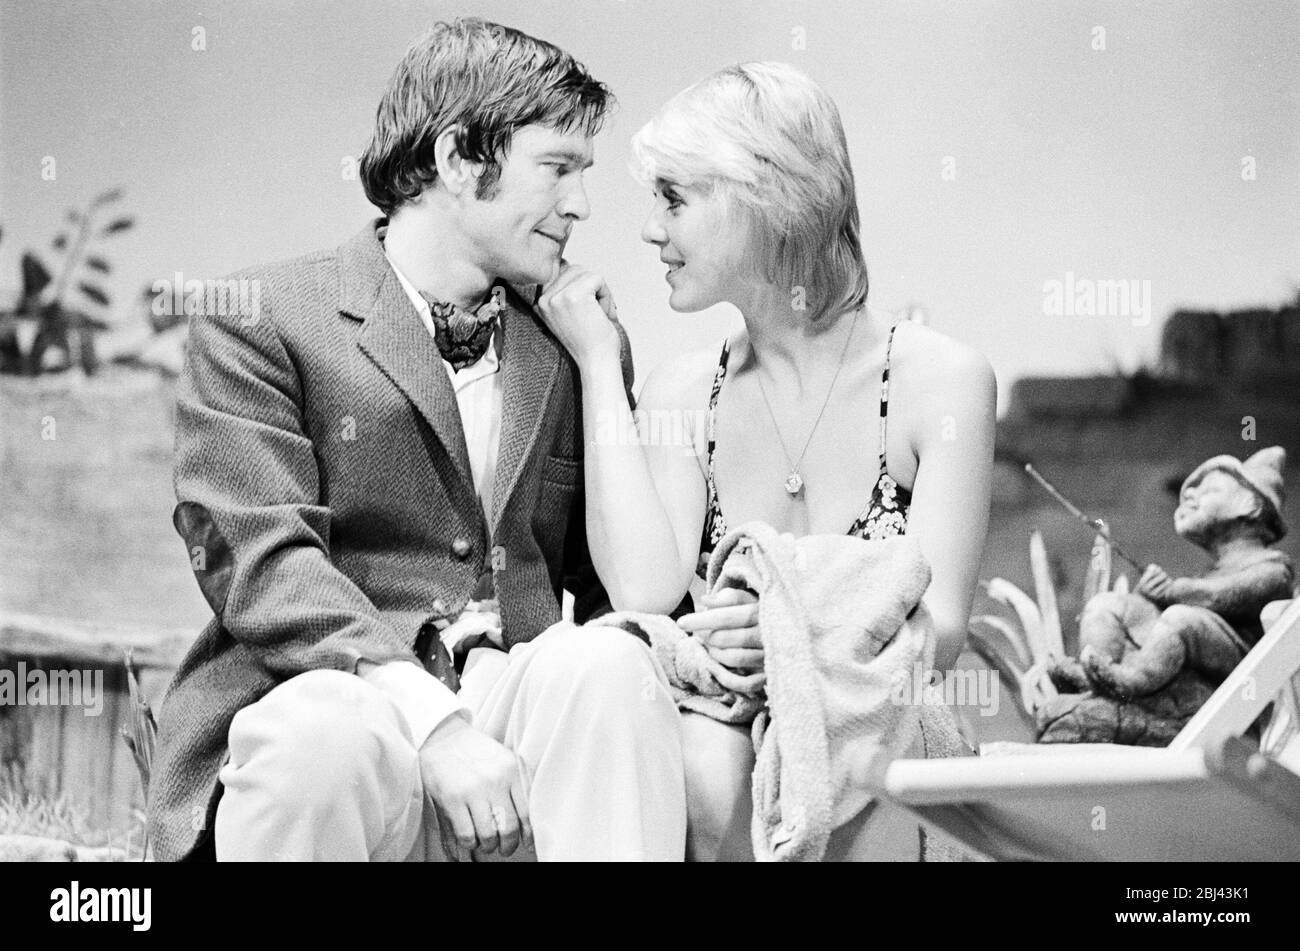 Tom Courtenay (Leonard), Cheryl Kennedy (Joan) in TIME AND TIME AGAIN by Alan Ayckbourn at the  Comedy Theatre, London in 1972   design: Alan Tagg lighting: Mick Hughes director: Eric Thompson Stock Photo